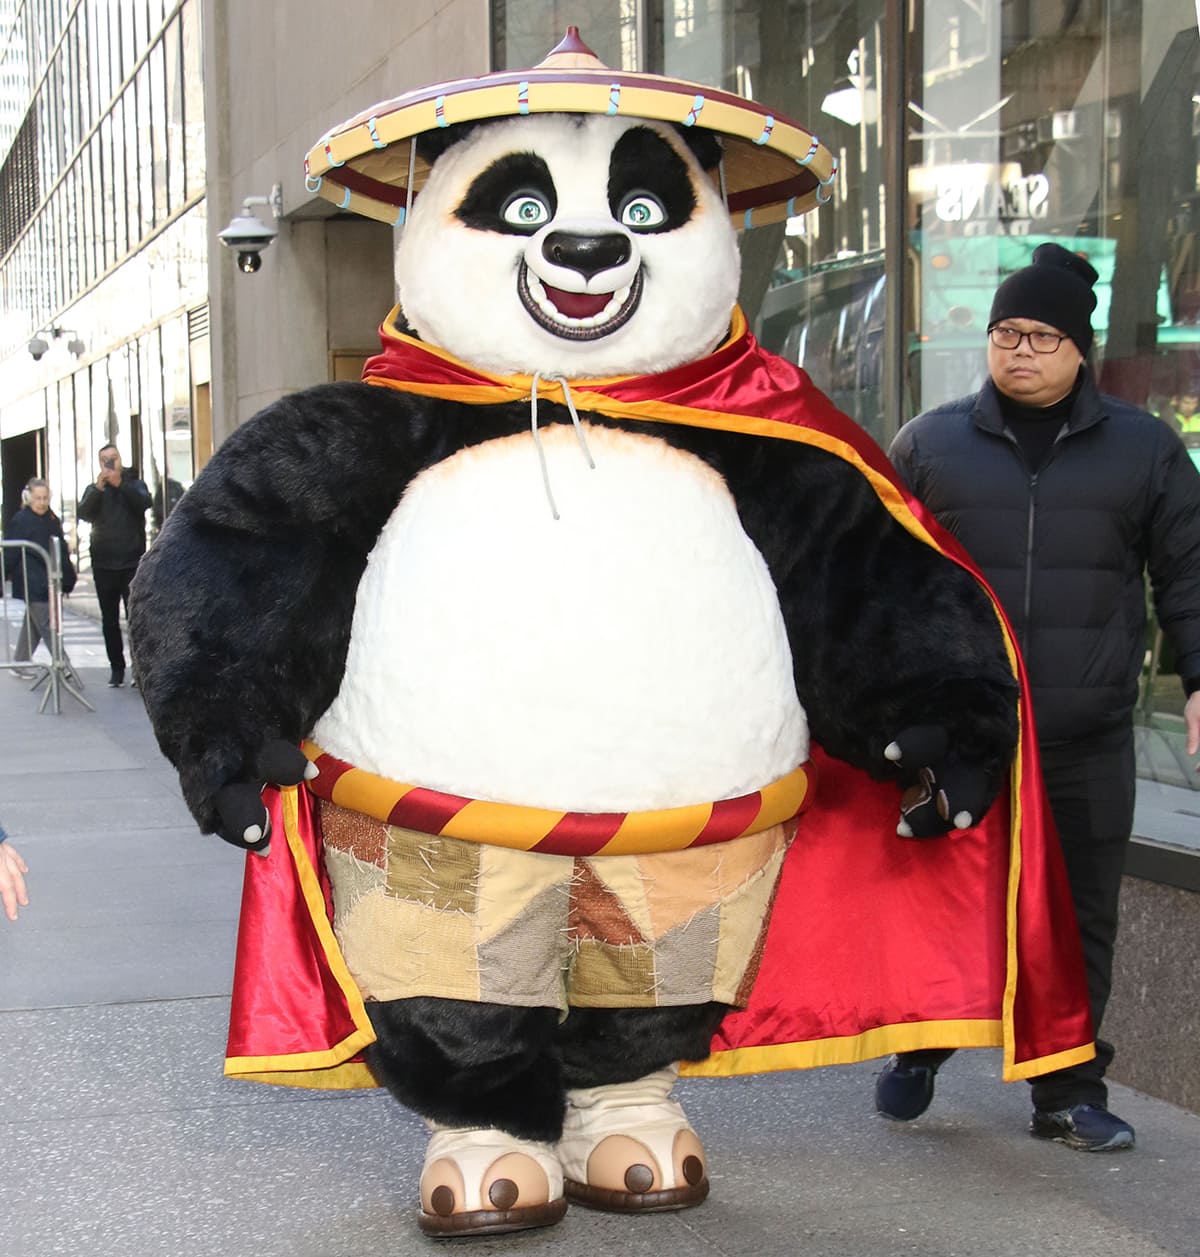 Dragon Warrior Po on Today Show in support of Kung Fu Panda 4